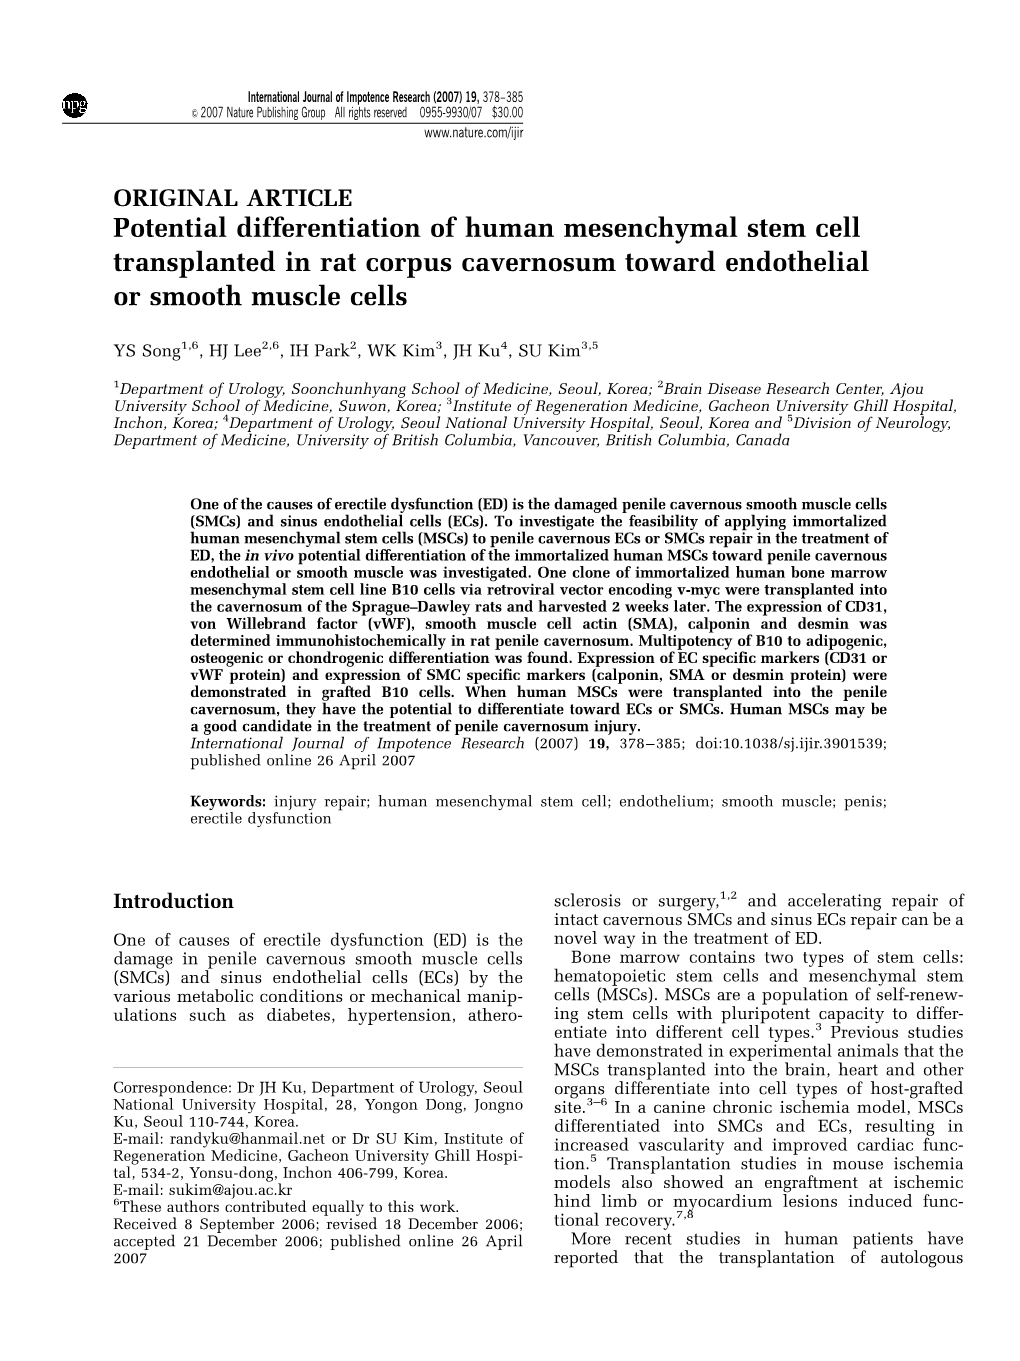 Potential Differentiation of Human Mesenchymal Stem Cell Transplanted in Rat Corpus Cavernosum Toward Endothelial Or Smooth Muscle Cells